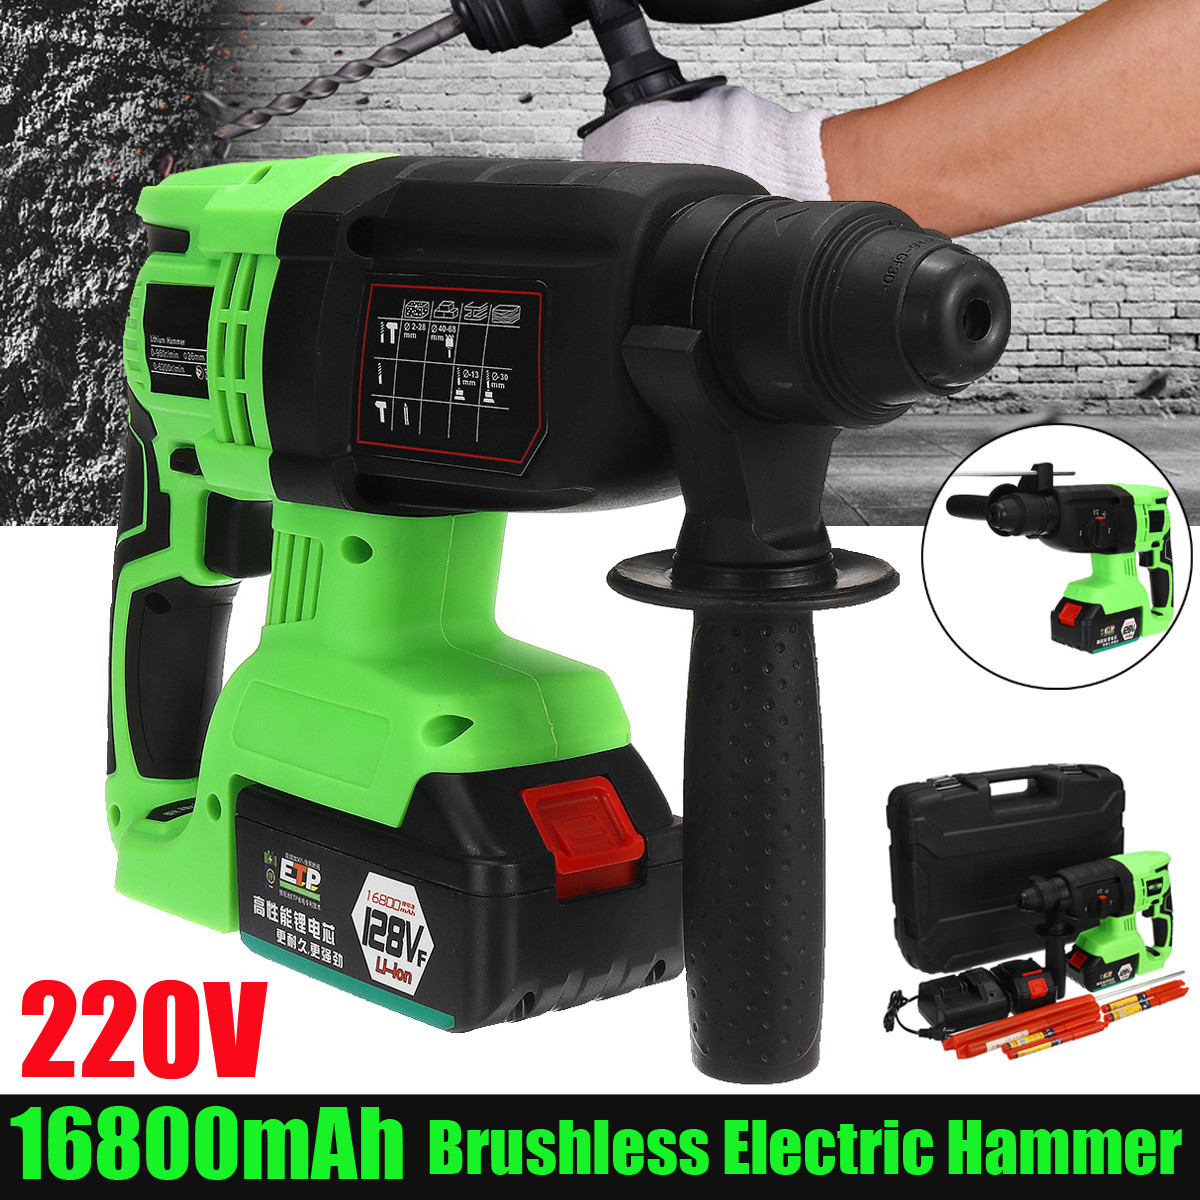 128VF-16800mAh-Brushless-Electric-Cordless-Impact-Hammer-High-Torque-Drill-with-Rechargeable-Battery-1522123-1